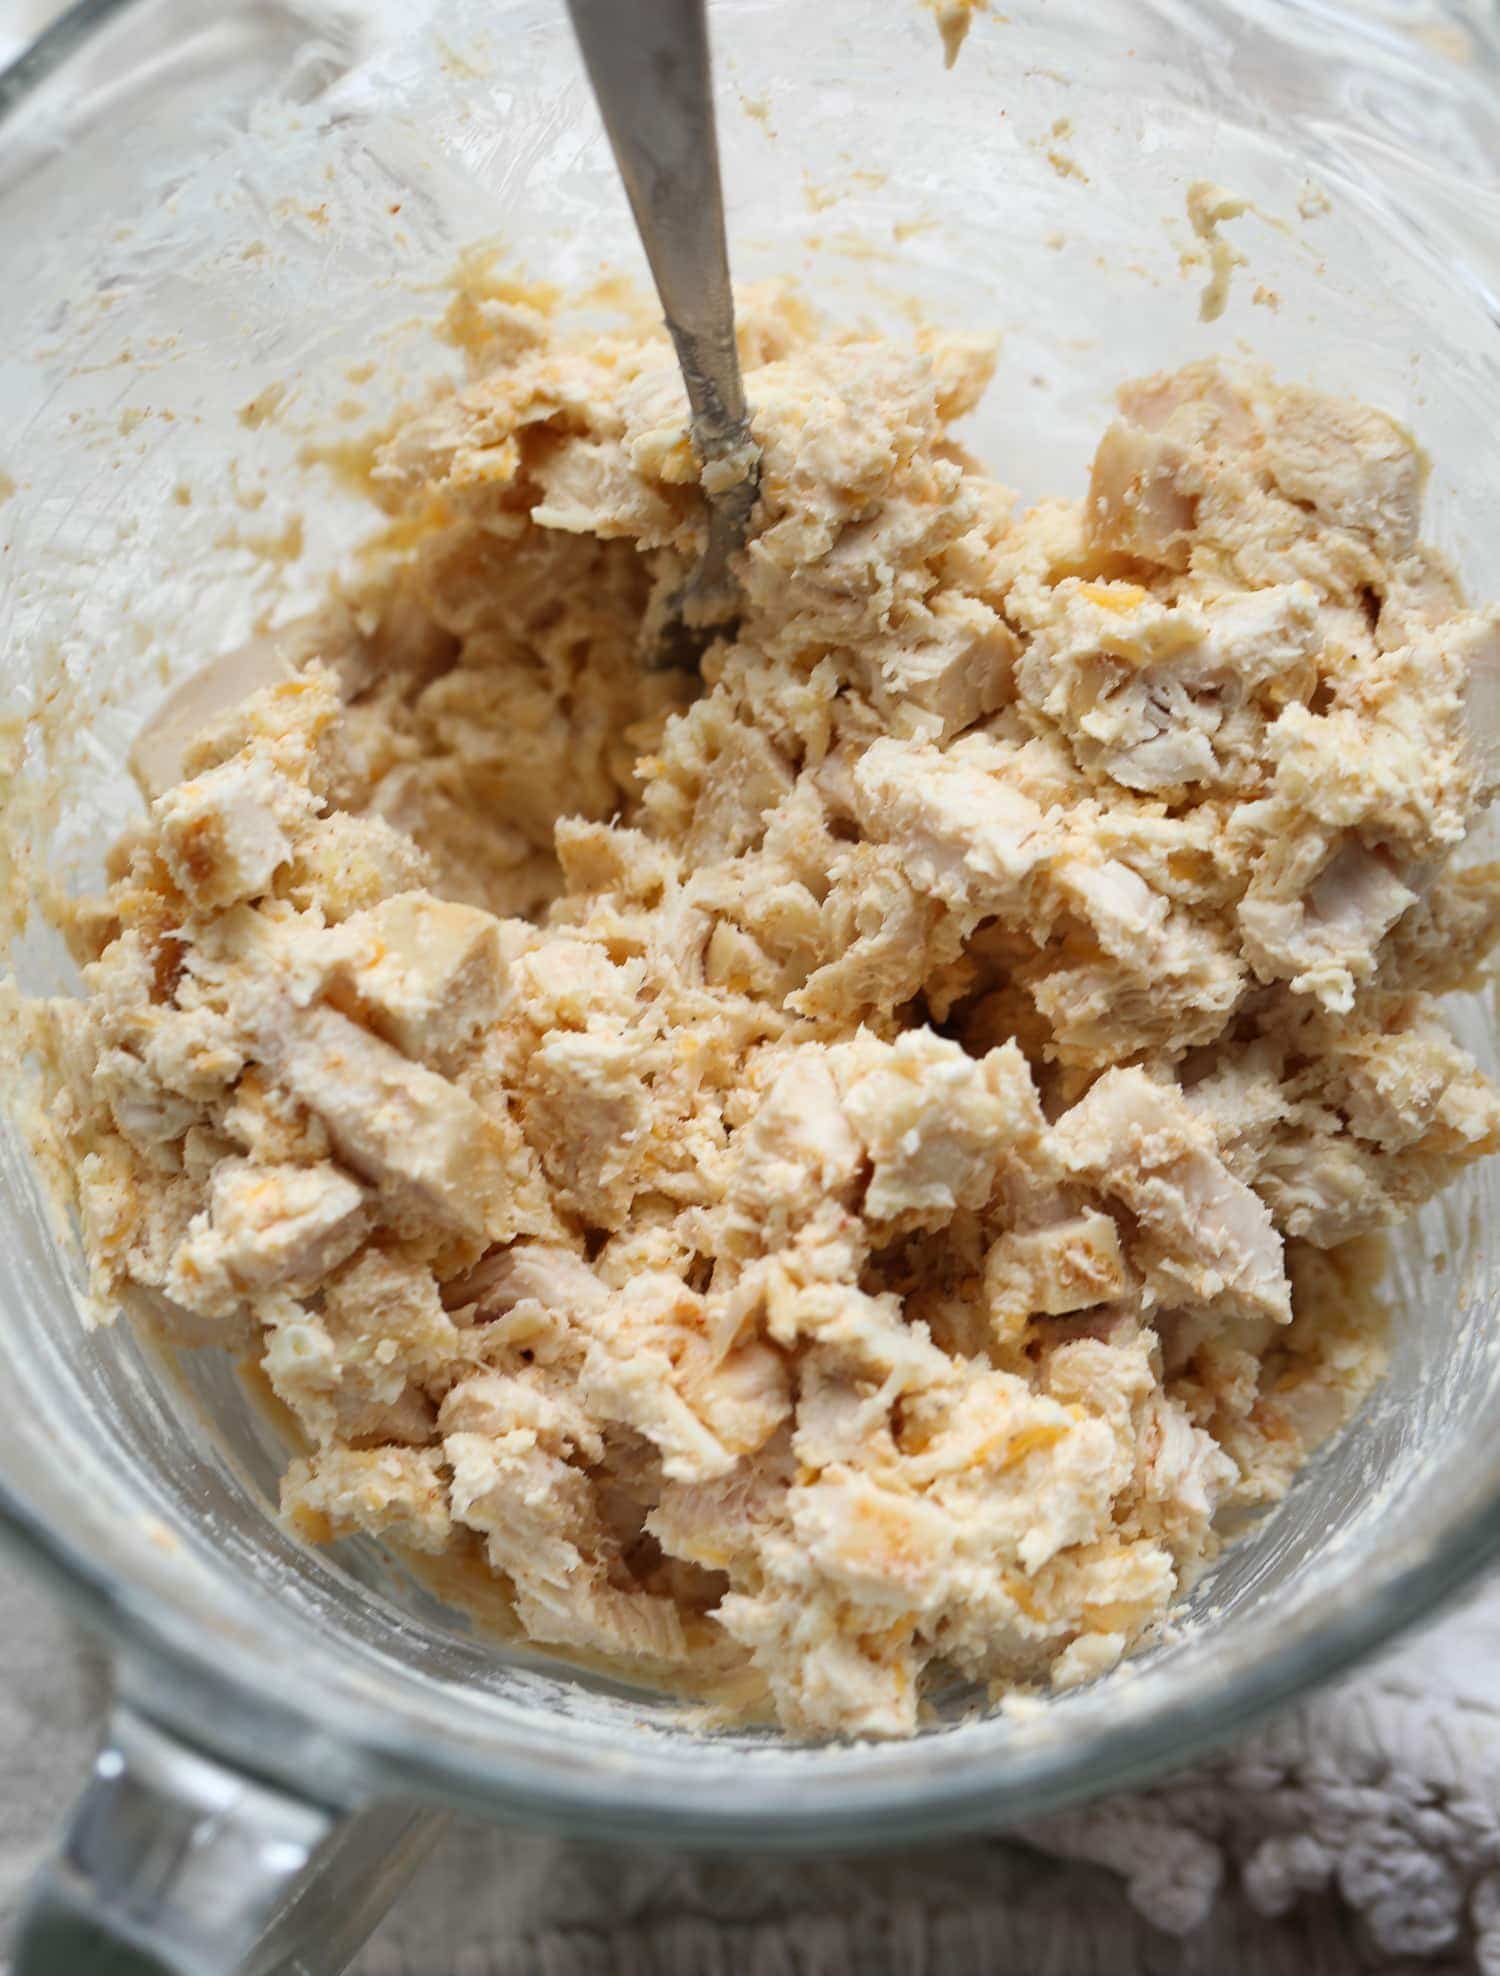 chicken, grated cheddar cheese, cream cheese, and seasonings mixed together in a glass bowl.